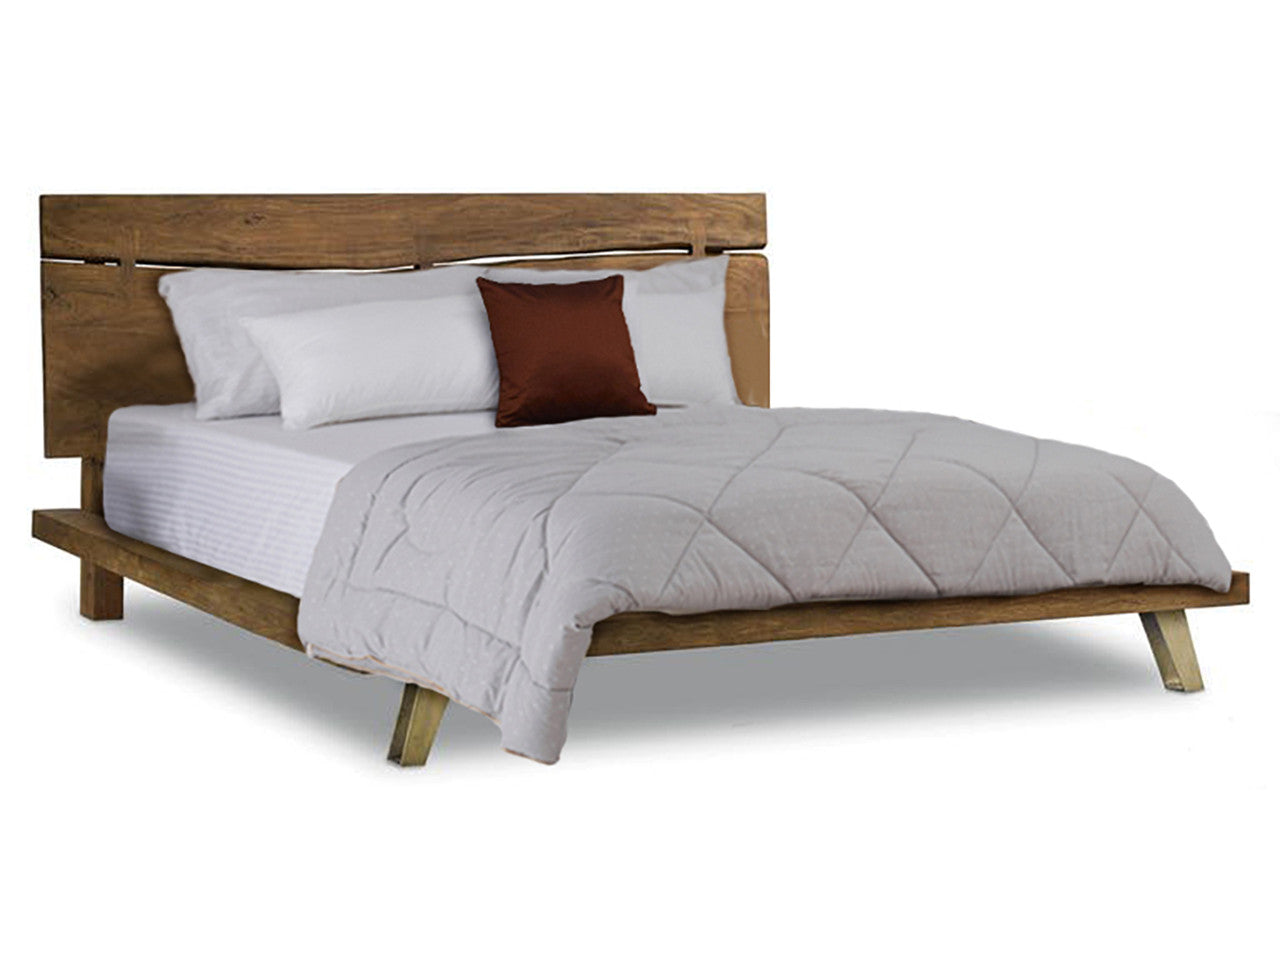 AFD Home Mountain Studio Modern Rustic Live Edge Plank King Bed 12021014